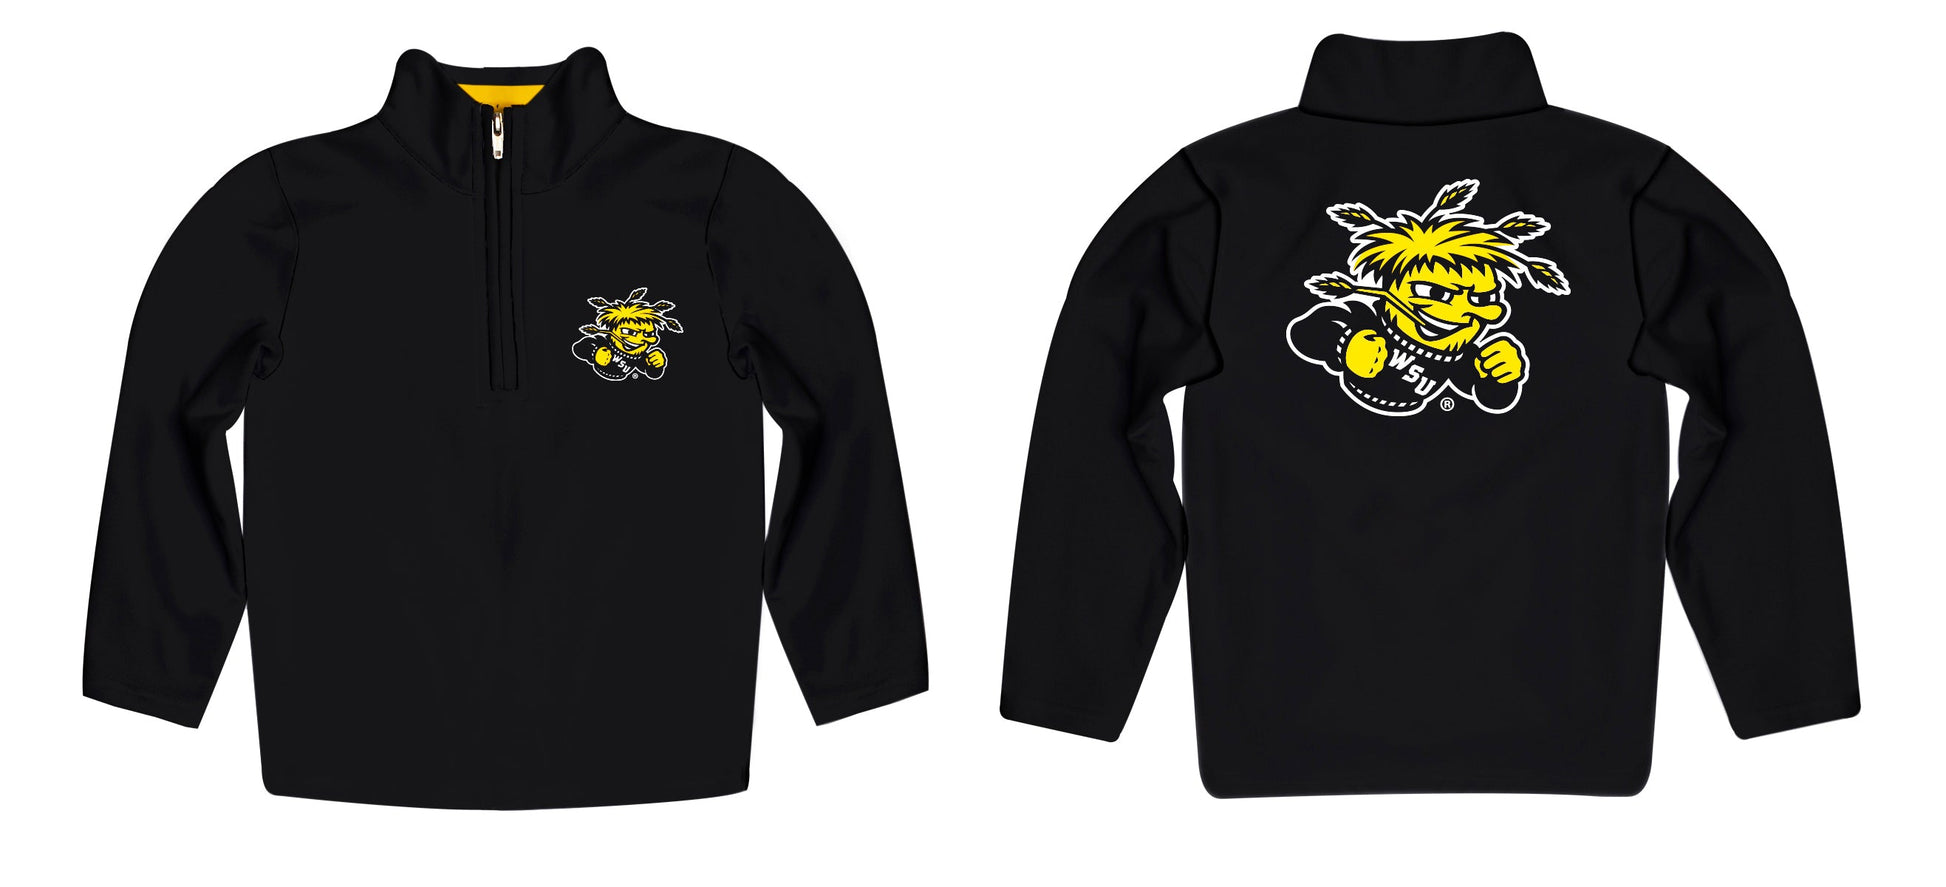 Wichita State Shockers WSU Game Day Solid Black Quarter Zip Pullover for Infants Toddlers by Vive La Fete